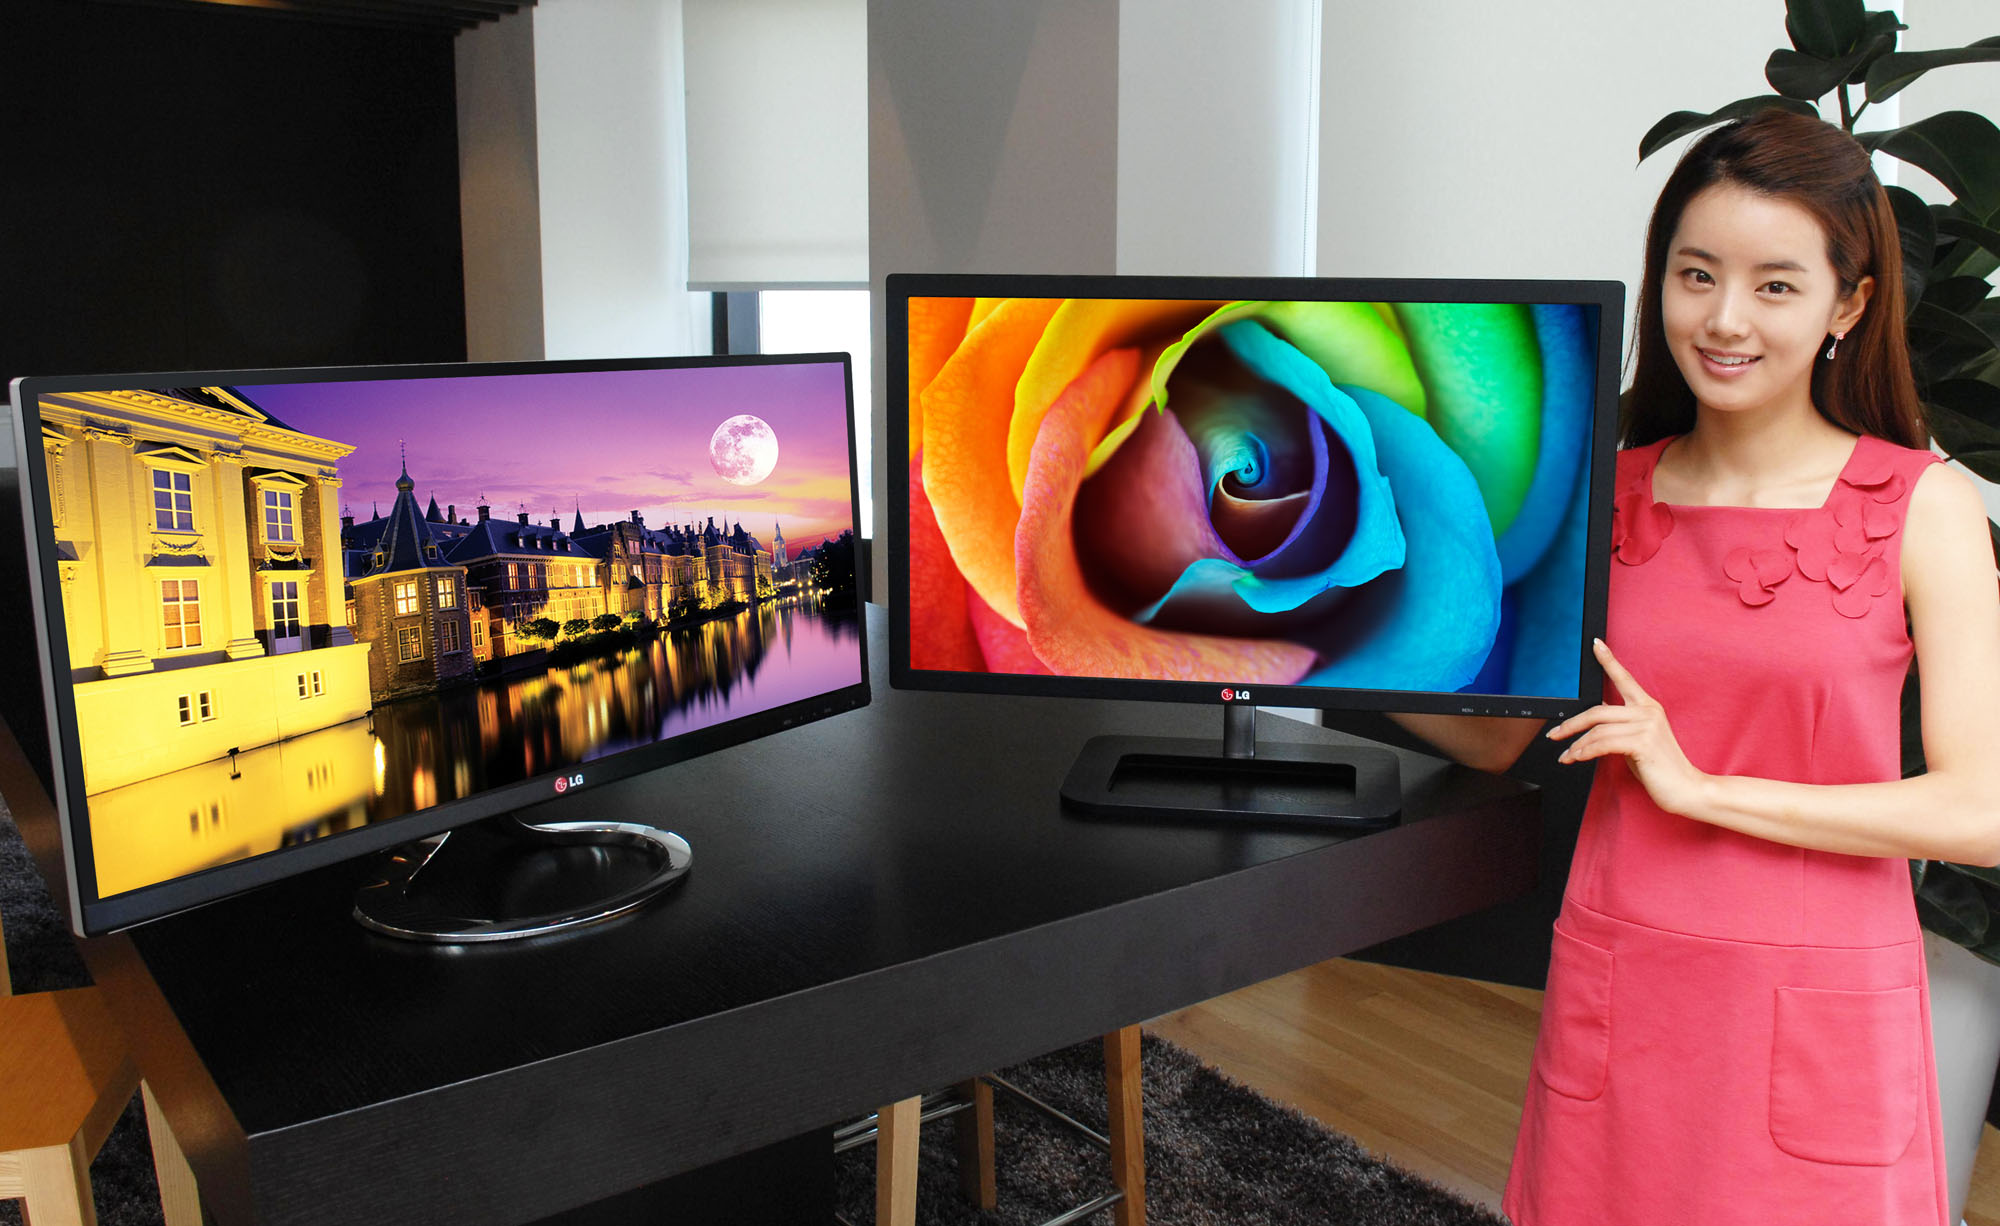 LG-Launches-New-IPS-Monitors-with-WHQL-and-MHL-2.jpg